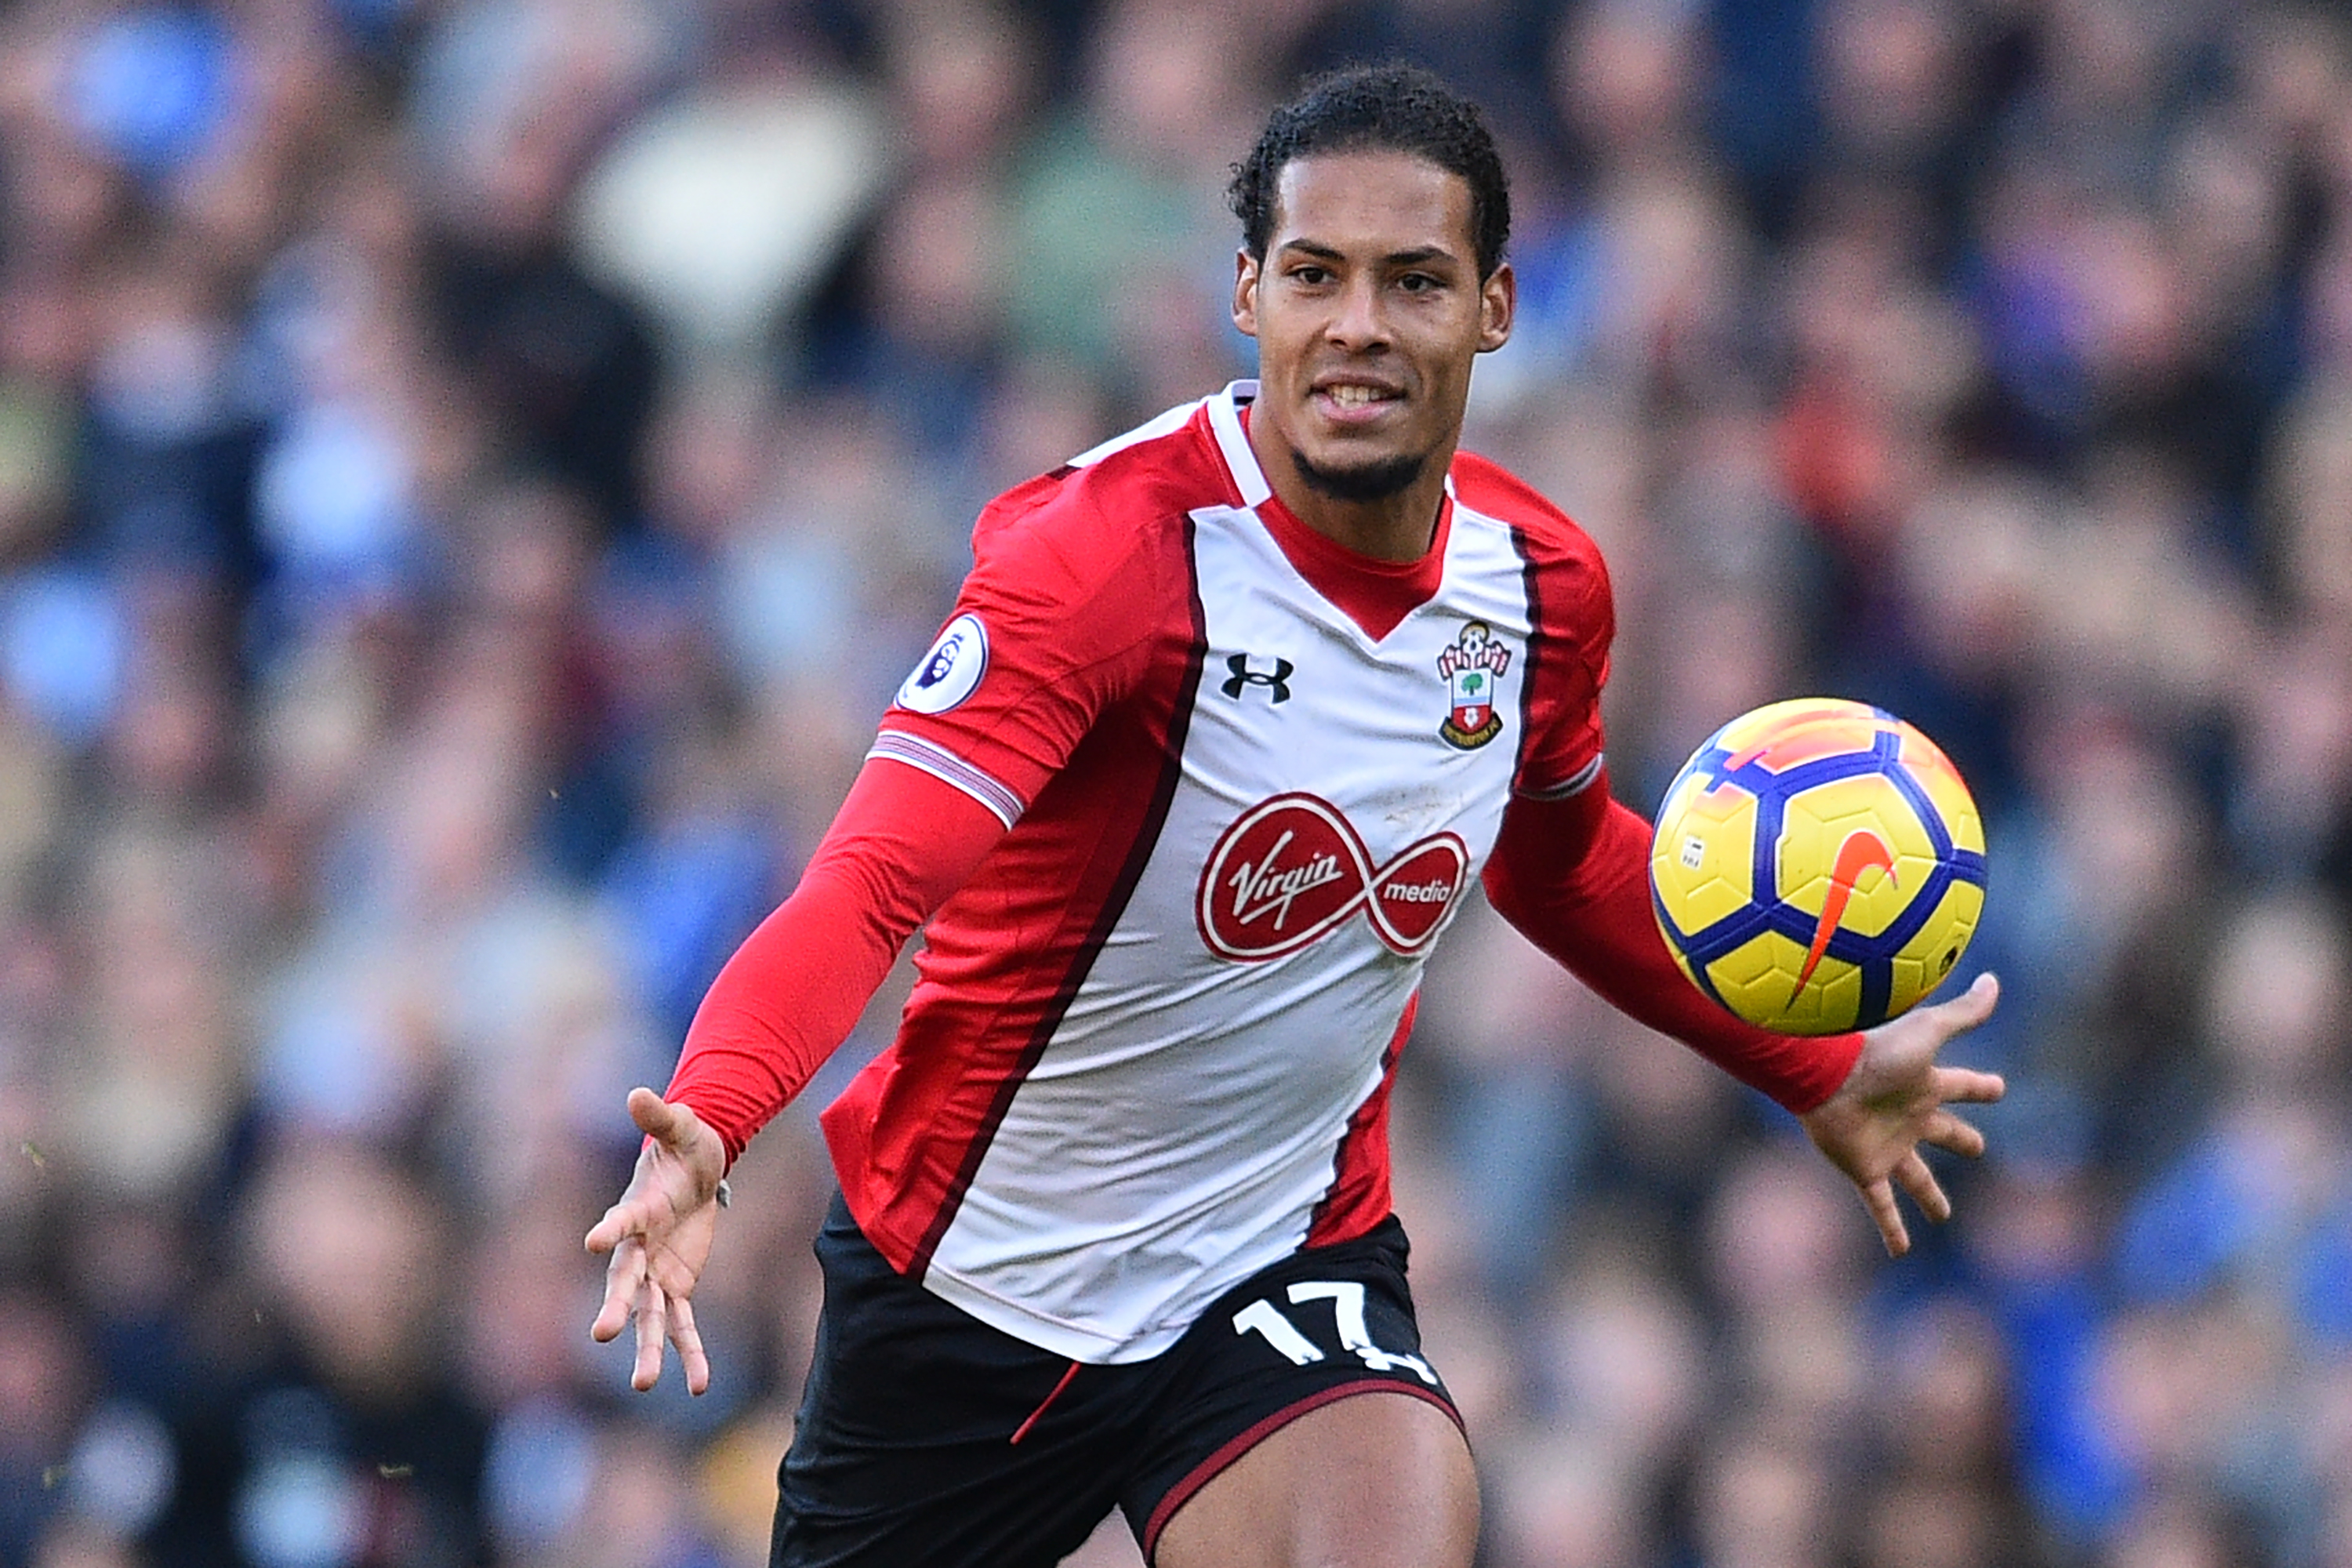 Southampton's Dutch defender Virgil van Dijk chases the ball during the English Premier League football match between Brighton and Hove Albion and Southampton at the American Express Community Stadium in Brighton, southern England on October 29, 2017. / AFP PHOTO / Glyn KIRK / RESTRICTED TO EDITORIAL USE. No use with unauthorized audio, video, data, fixture lists, club/league logos or 'live' services. Online in-match use limited to 75 images, no video emulation. No use in betting, games or single club/league/player publications.  /         (Photo credit should read GLYN KIRK/AFP/Getty Images)